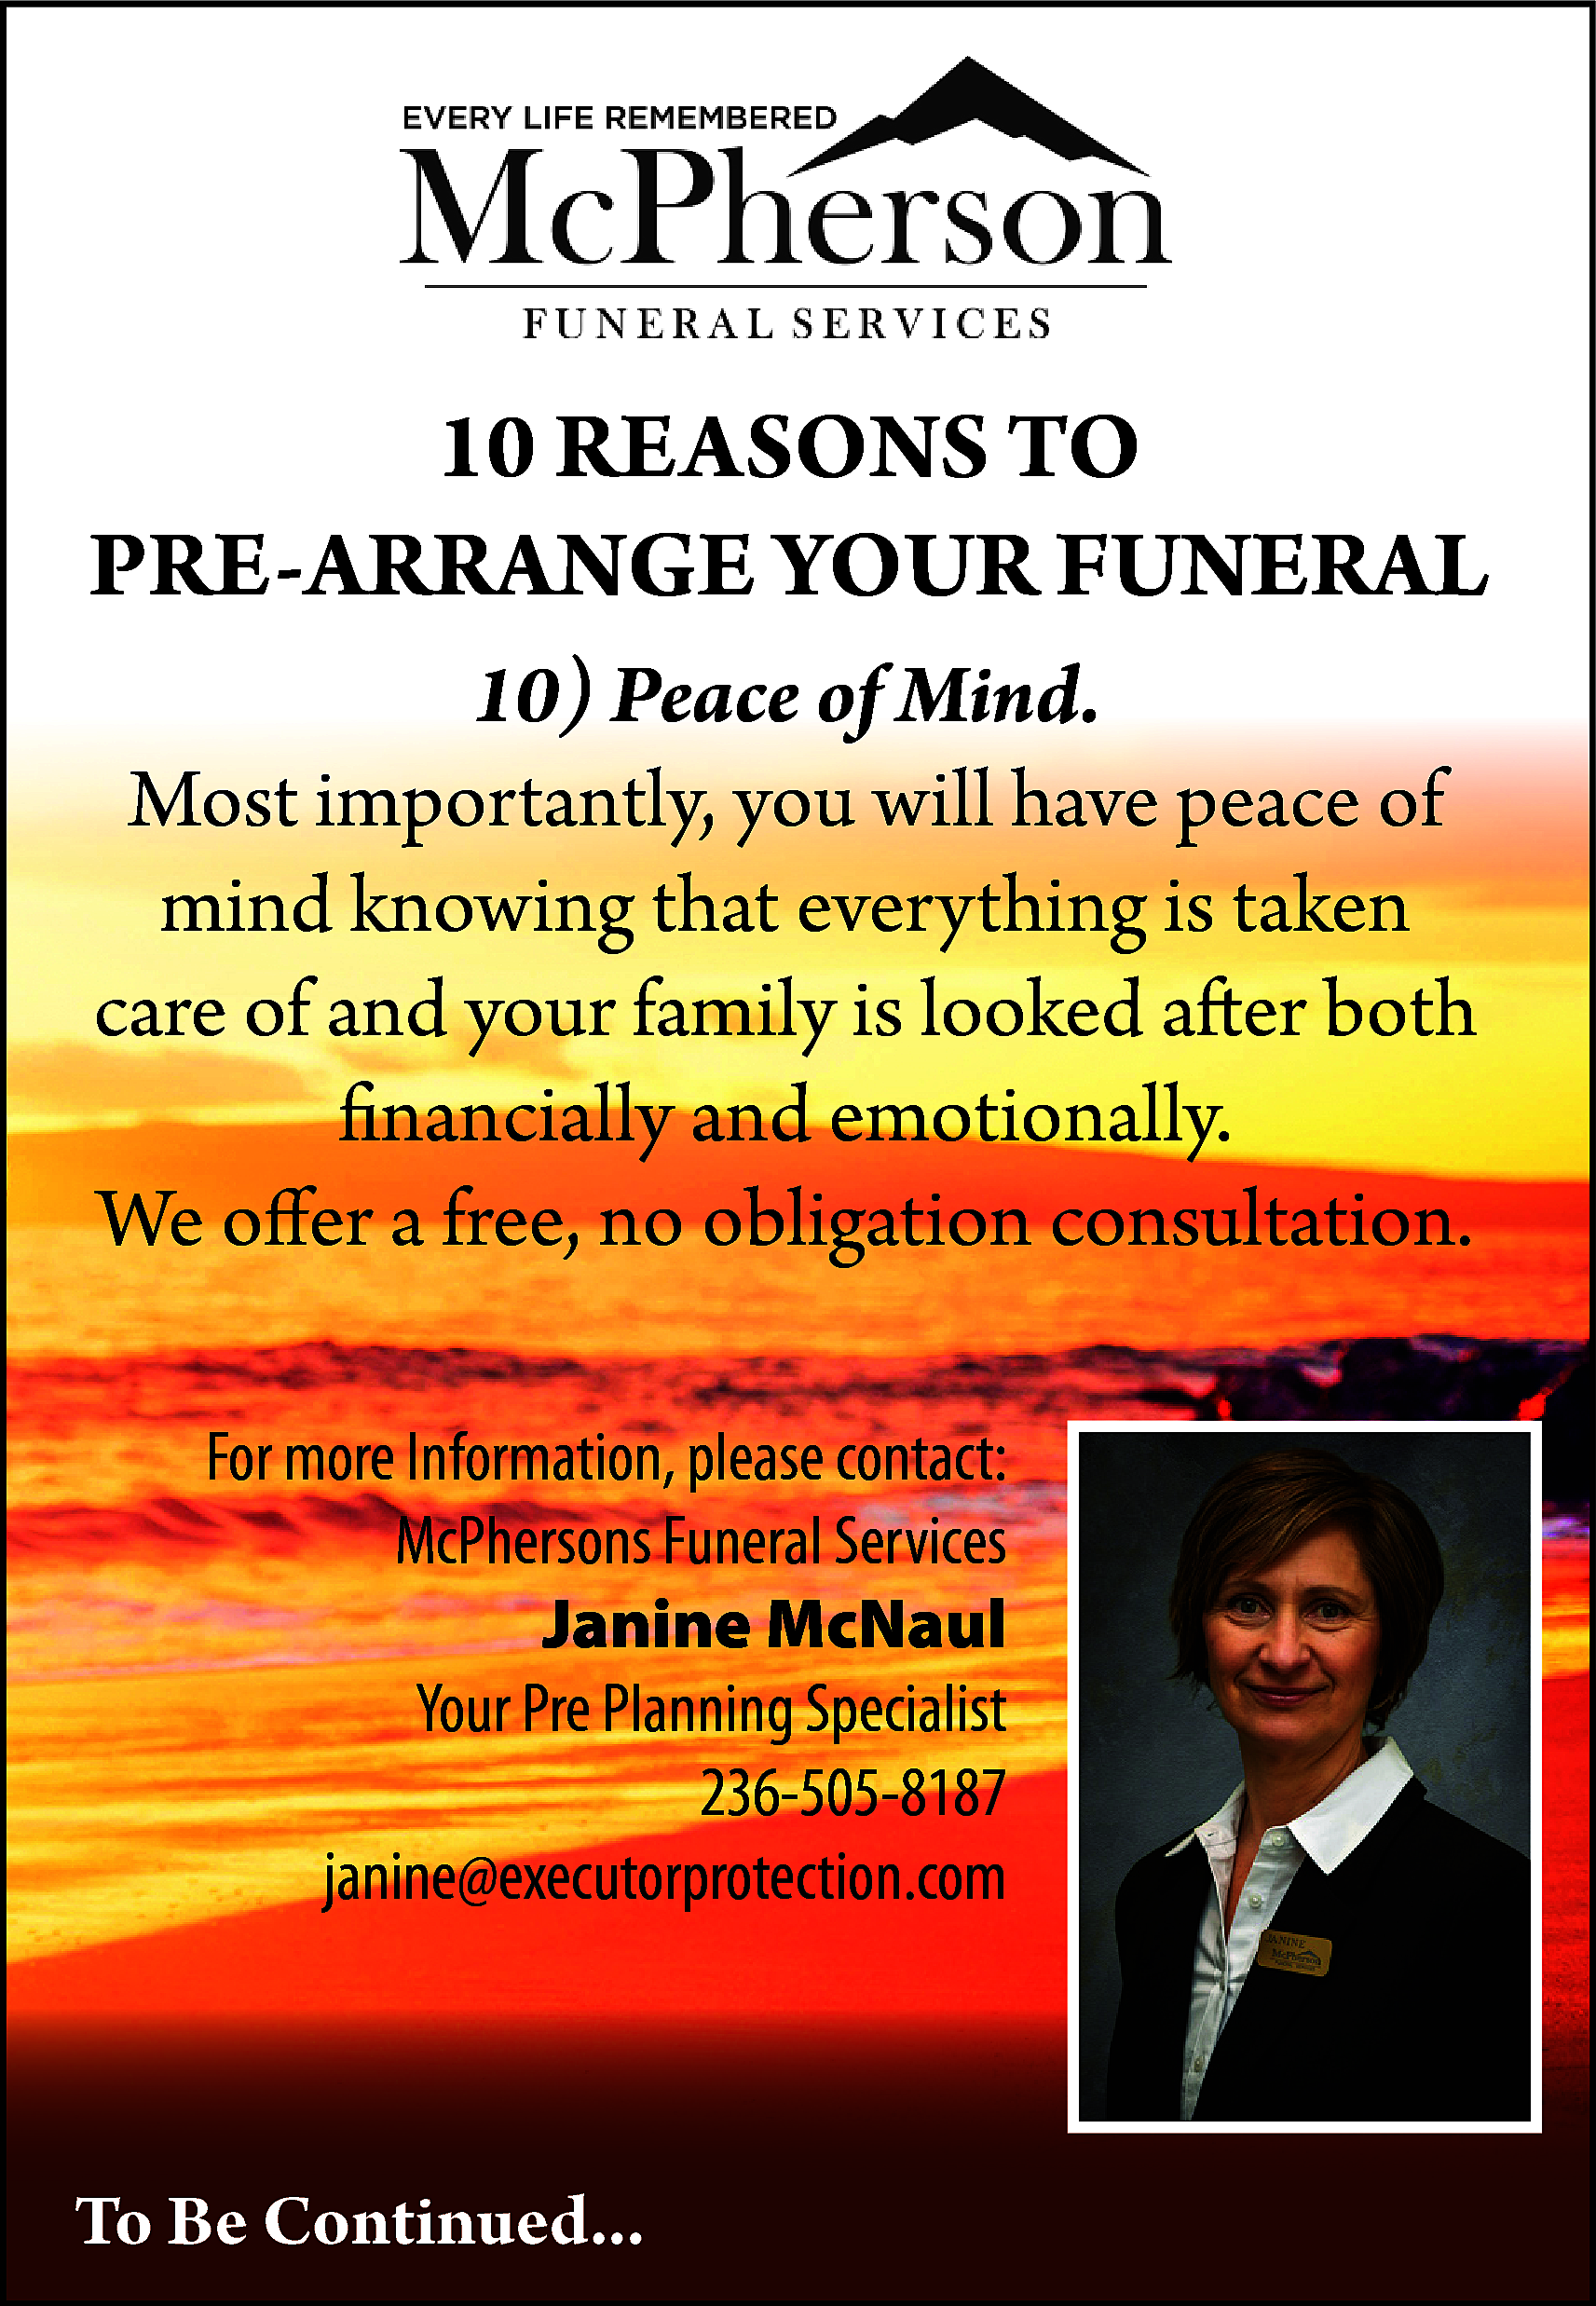 10 REASONS TO <br>PRE-ARRANGE YOUR  10 REASONS TO  PRE-ARRANGE YOUR FUNERAL  10) Peace of Mind.  Most importantly, you will have peace of  mind knowing that everything is taken  care of and your family is looked after both  financially and emotionally.  We offer a free, no obligation consultation.  For more Information, please contact:  McPhersons Funeral Services  Janine McNaul  Your Pre Planning Specialist  236-505-8187  janine@executorprotection.com    To Be Continued...    